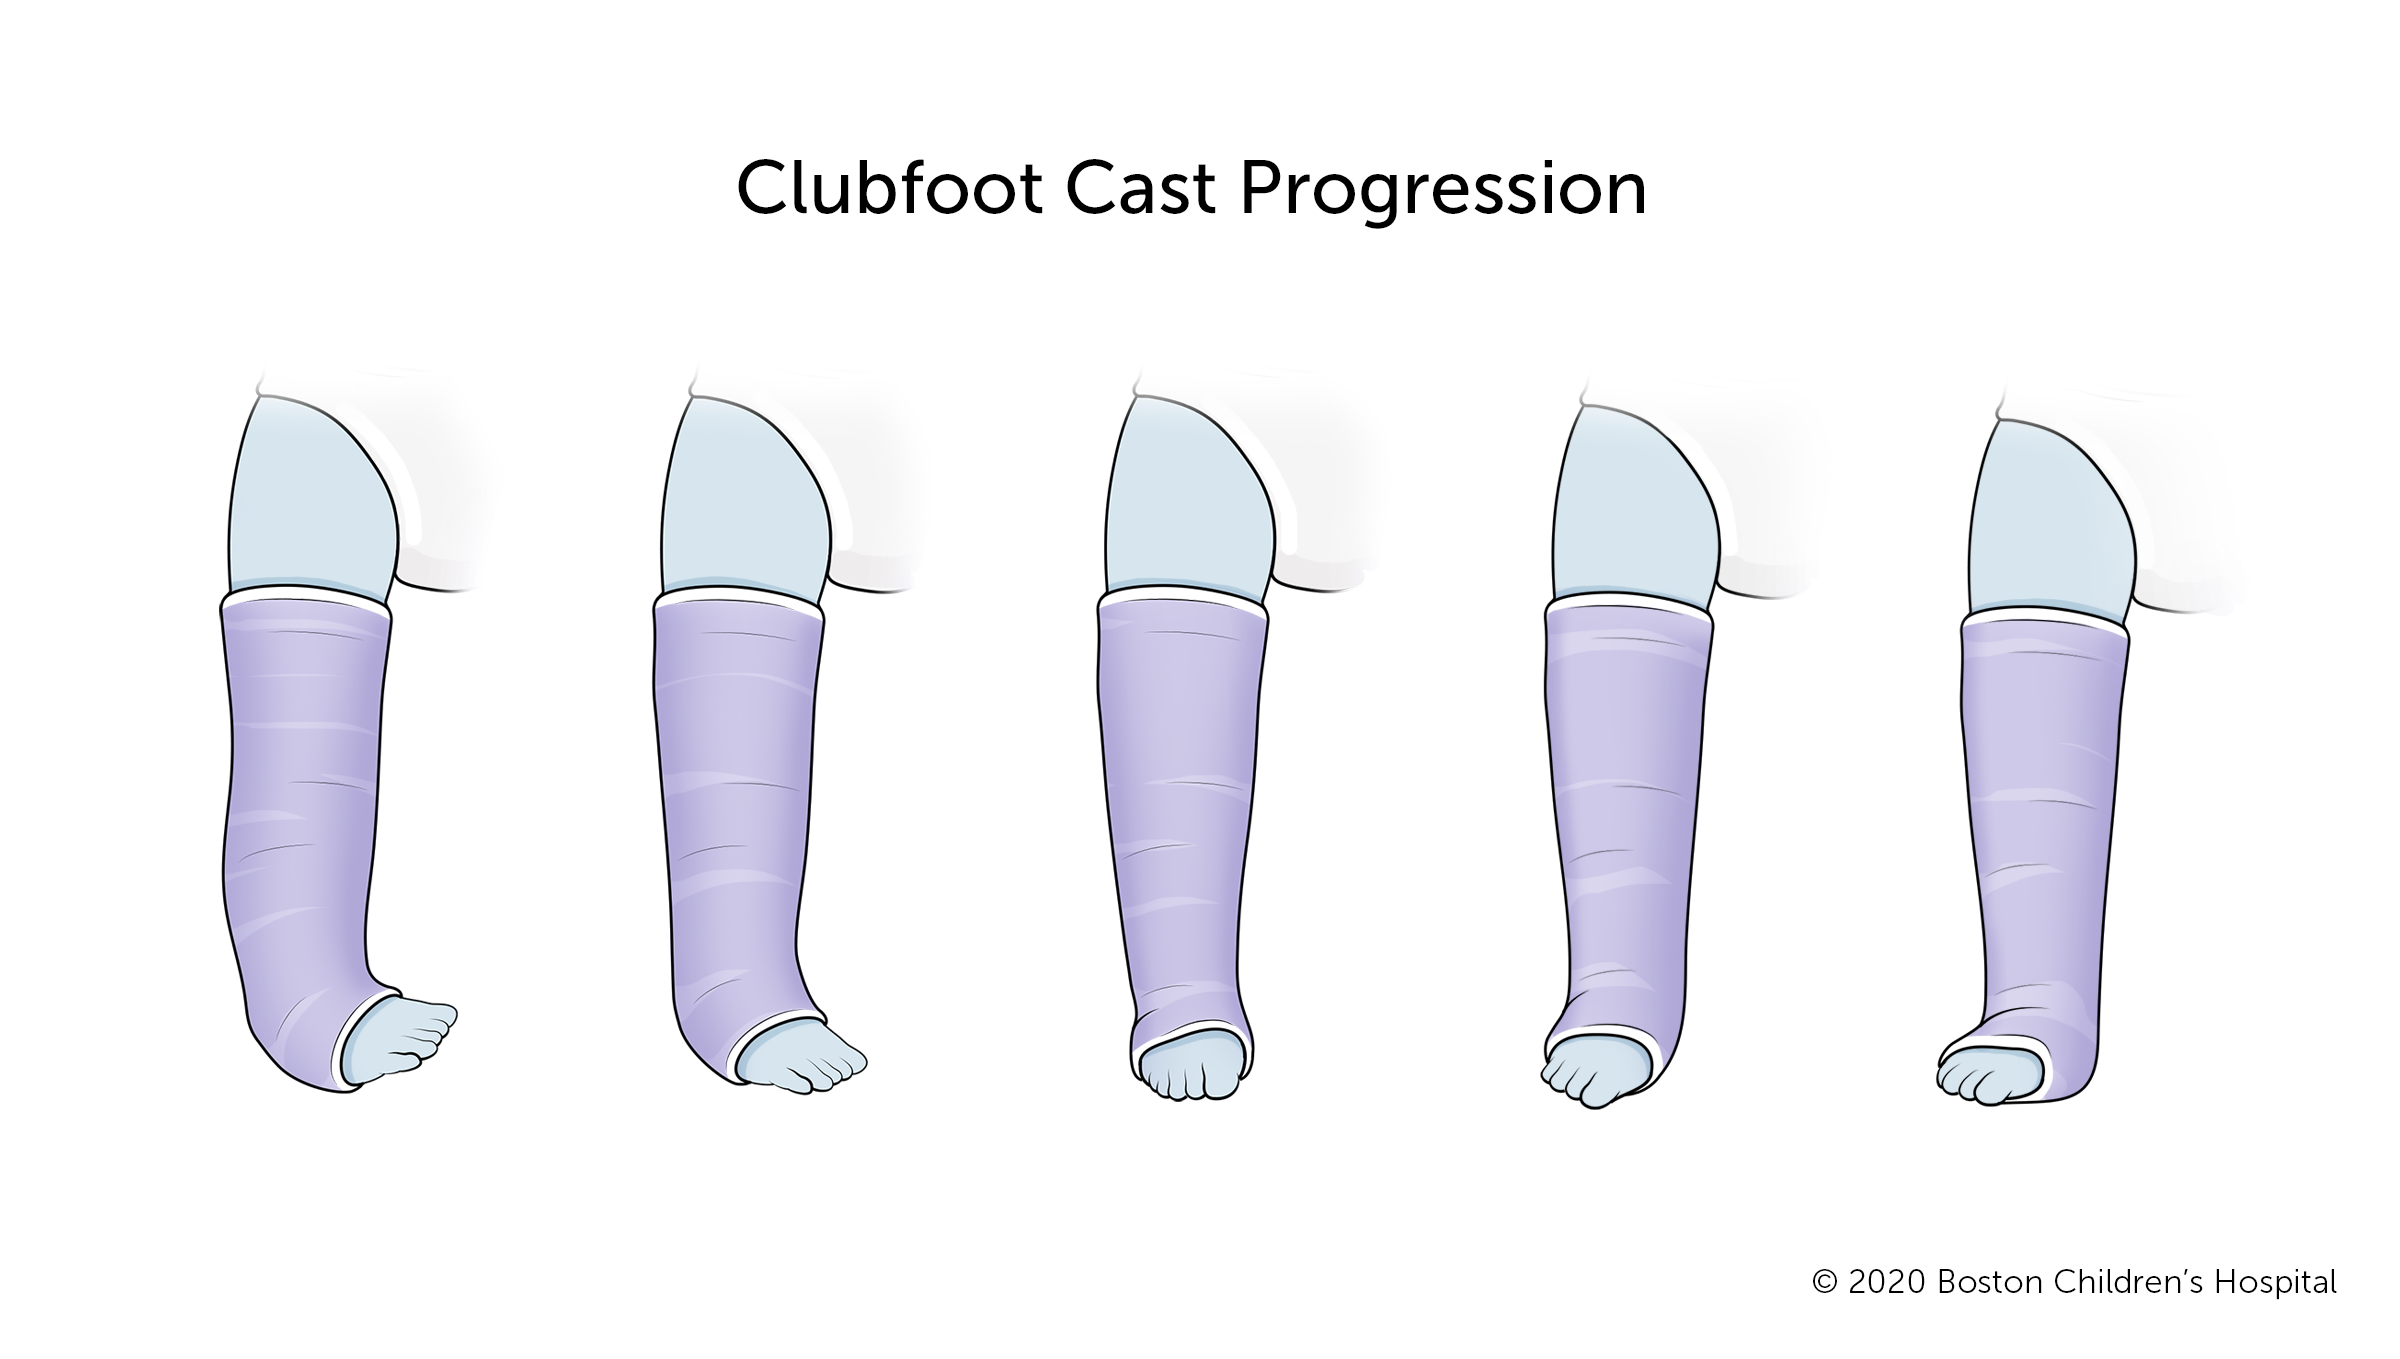 The progression of clubfoot casts.